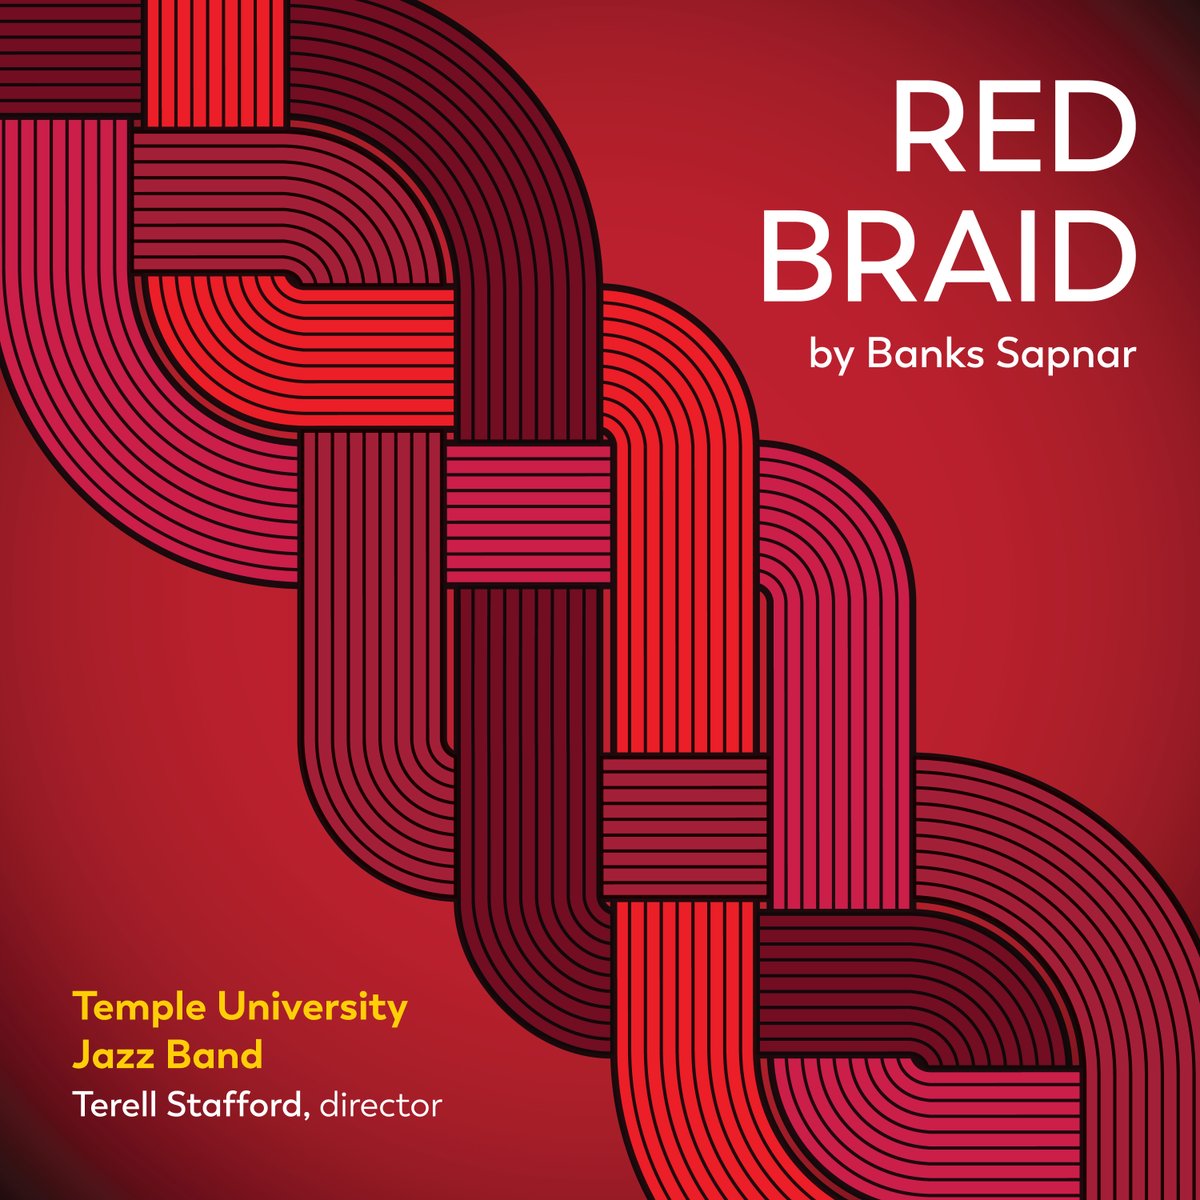 OUT TODAY: Red Braid, written by Banks Sapnar and recorded by the Temple University Jazz Band for BCM&D Records Now available on major streaming platforms! Learn more at boyer.temple.edu/bcmd.